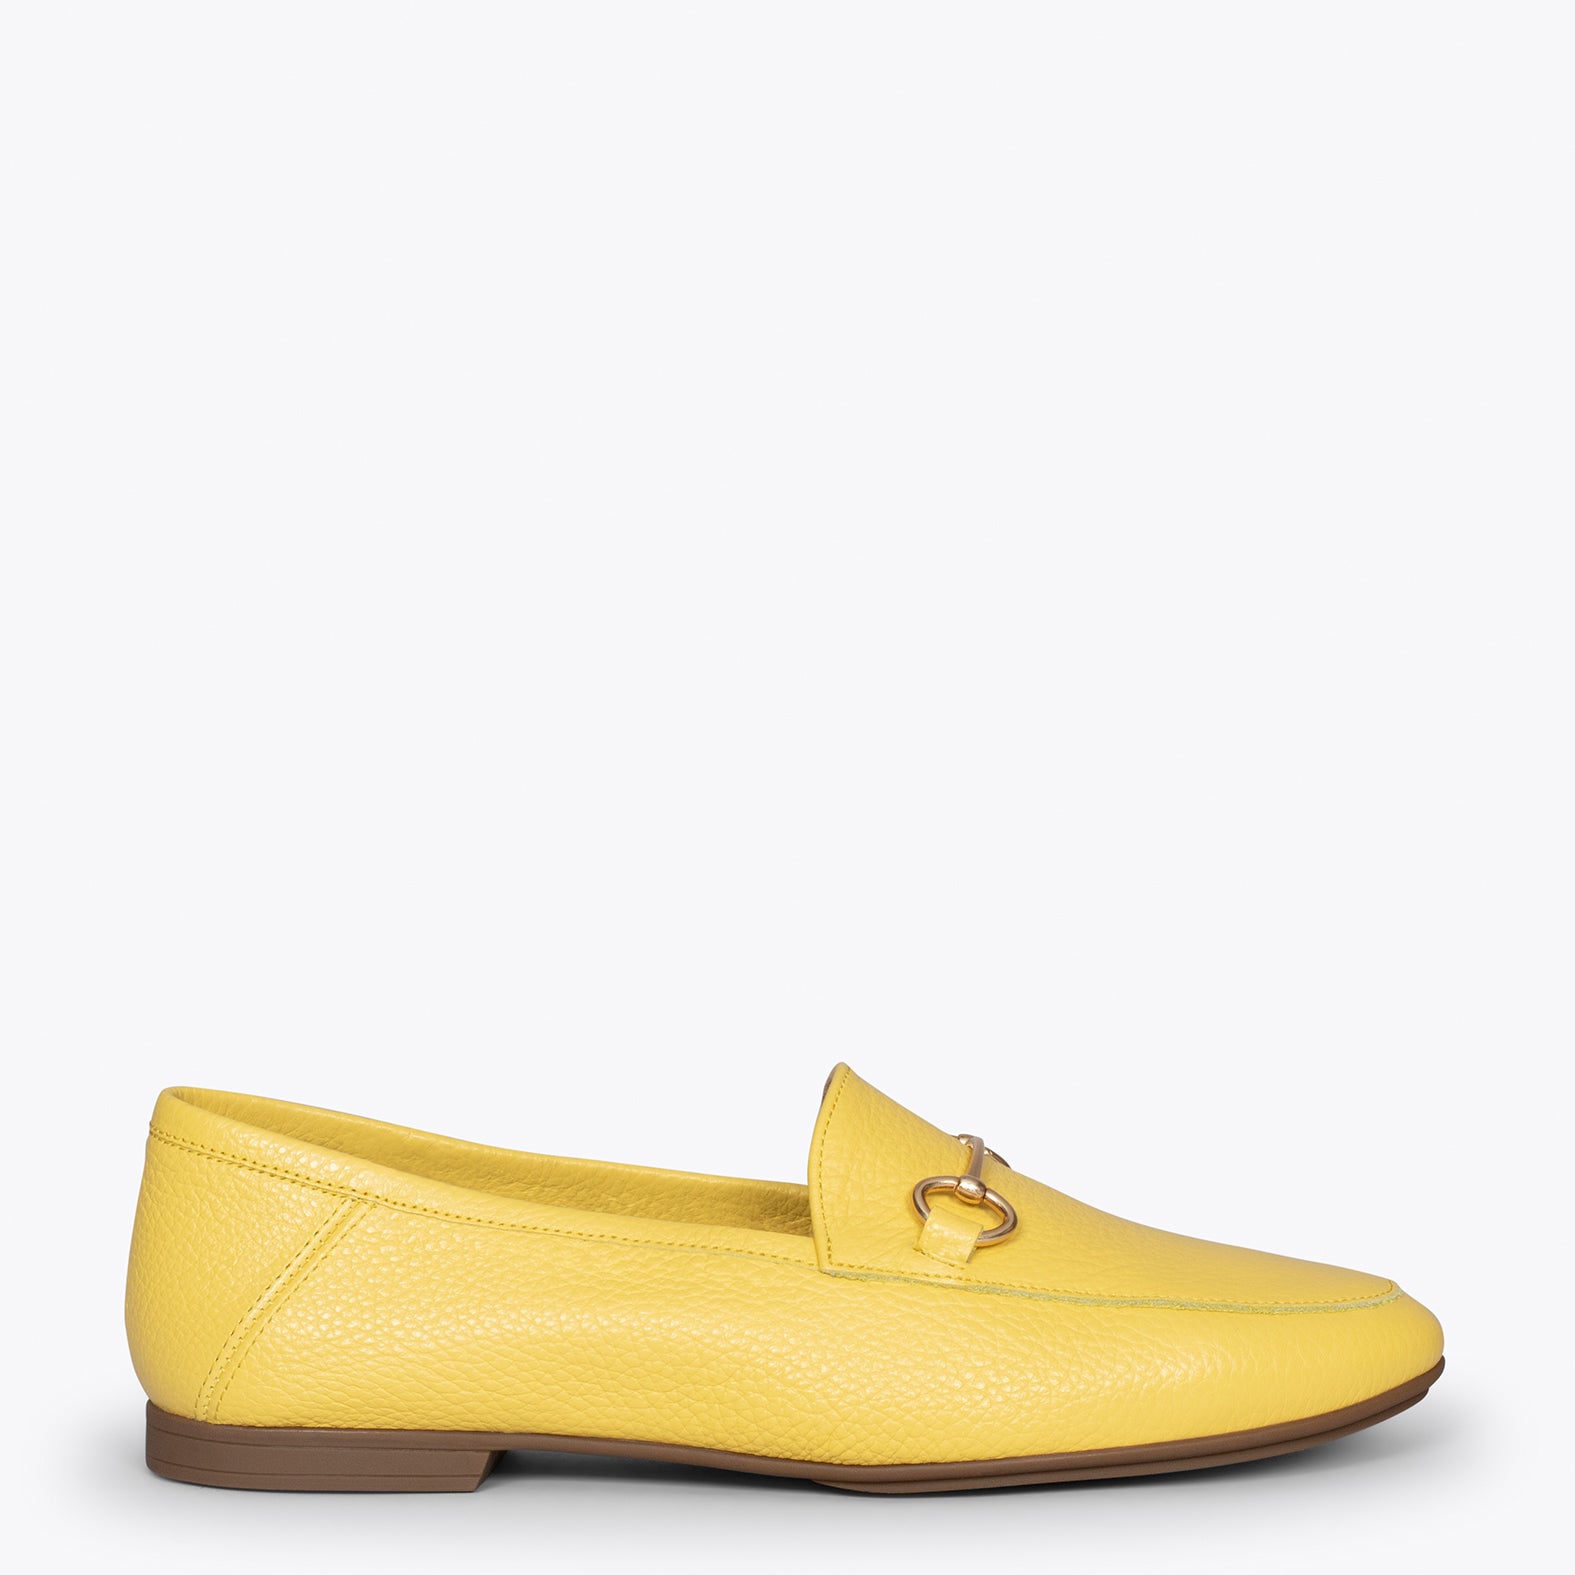 STYLE – YELLOW moccasins with horsebit